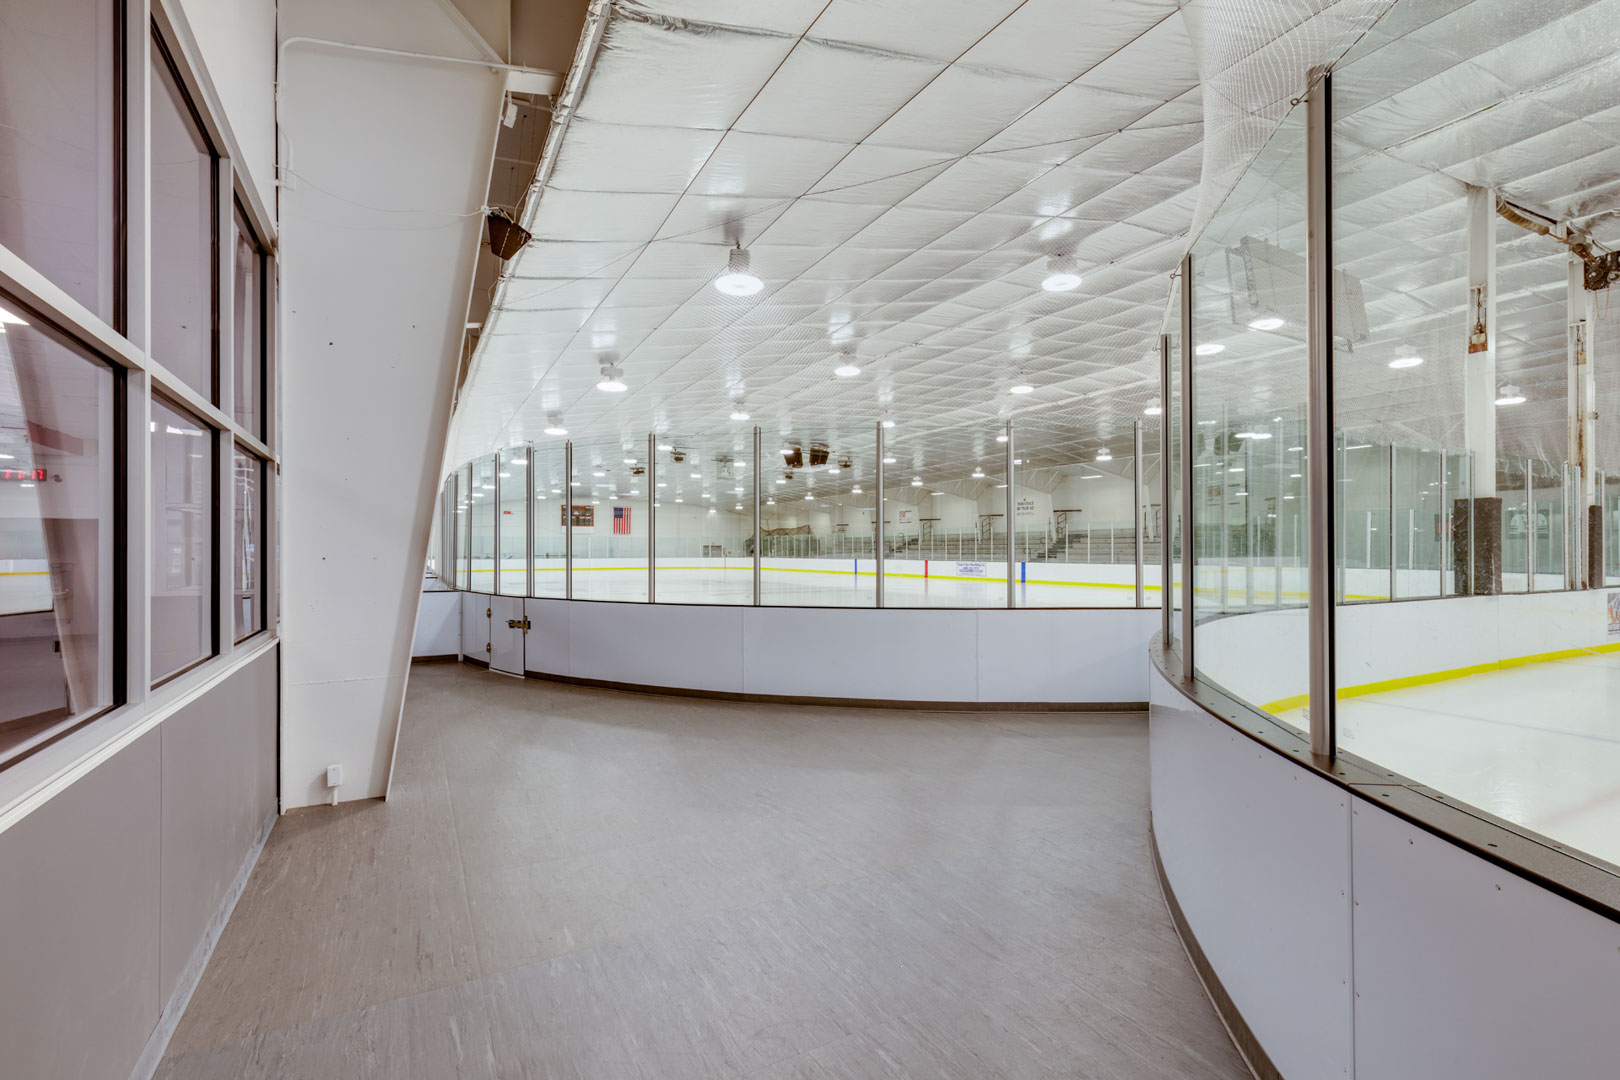 Observation area between rink and lobby